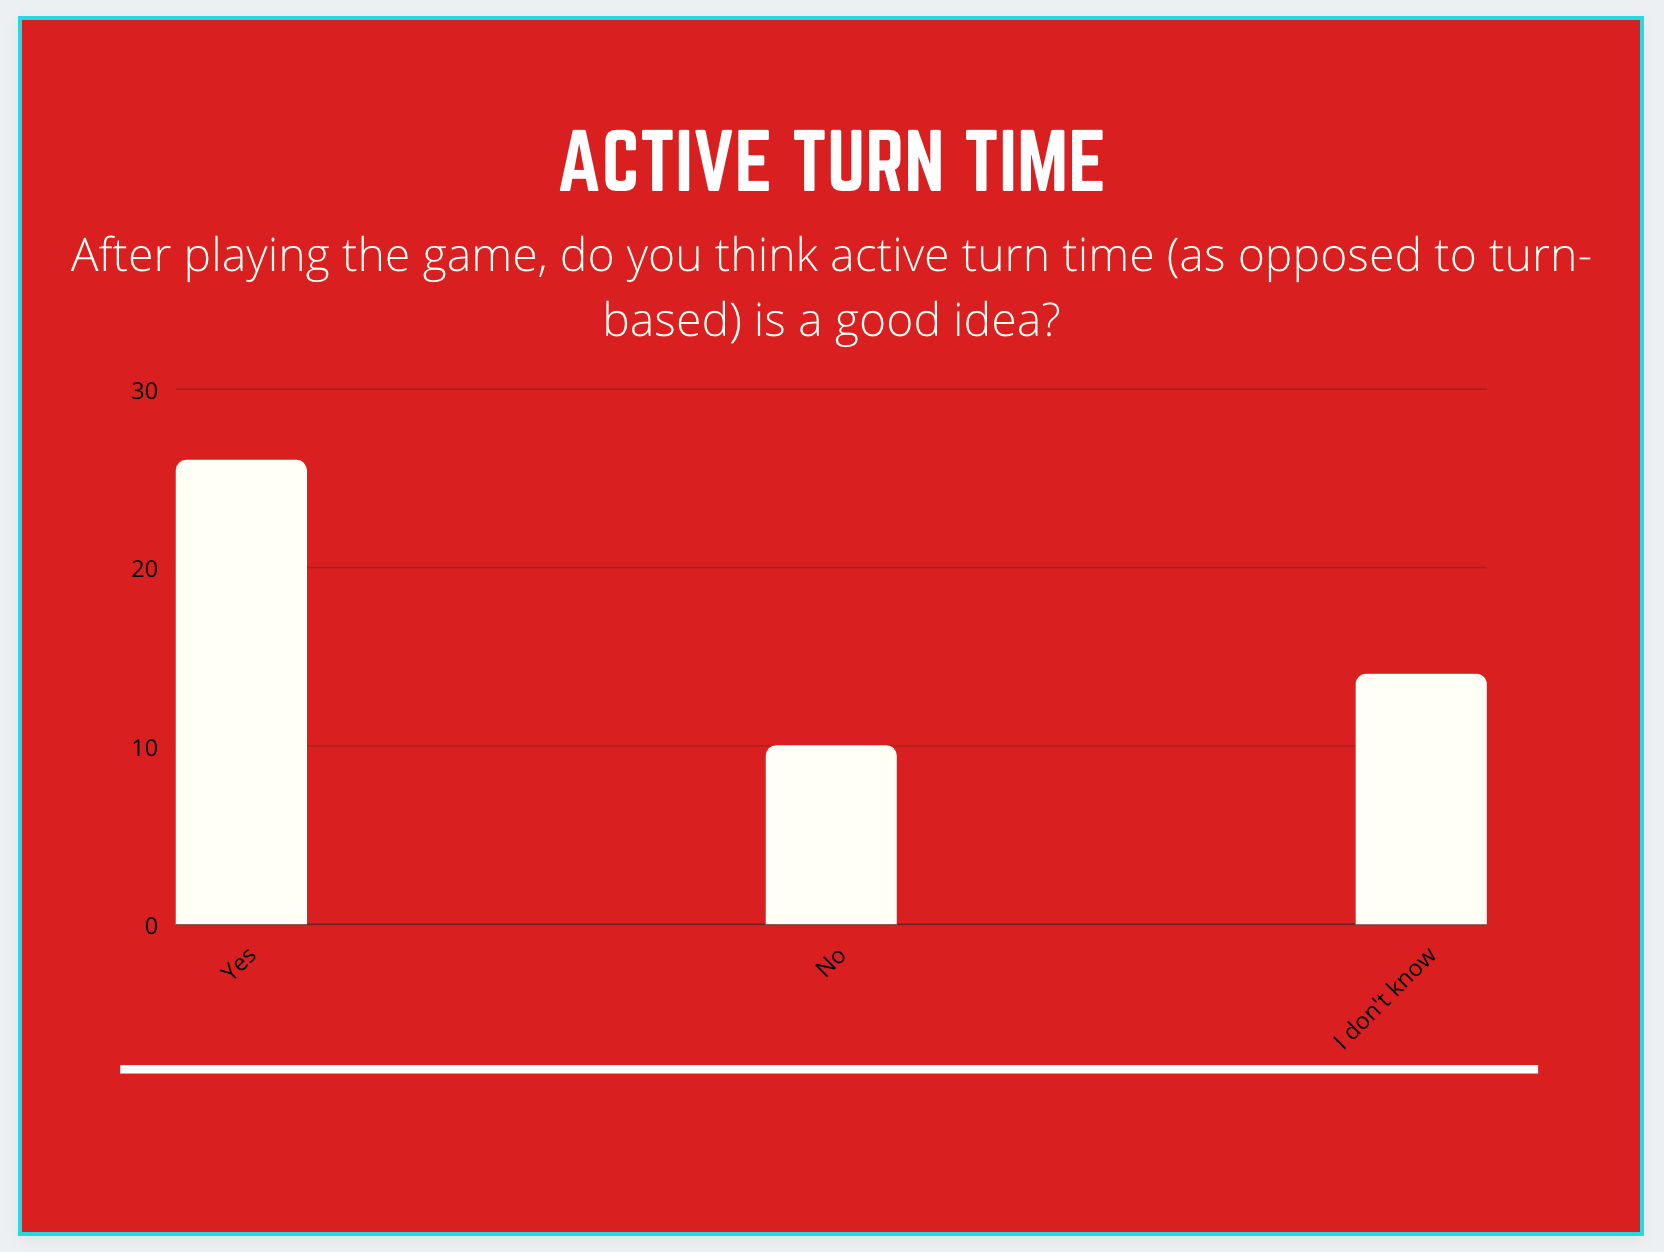 Active turn time poll